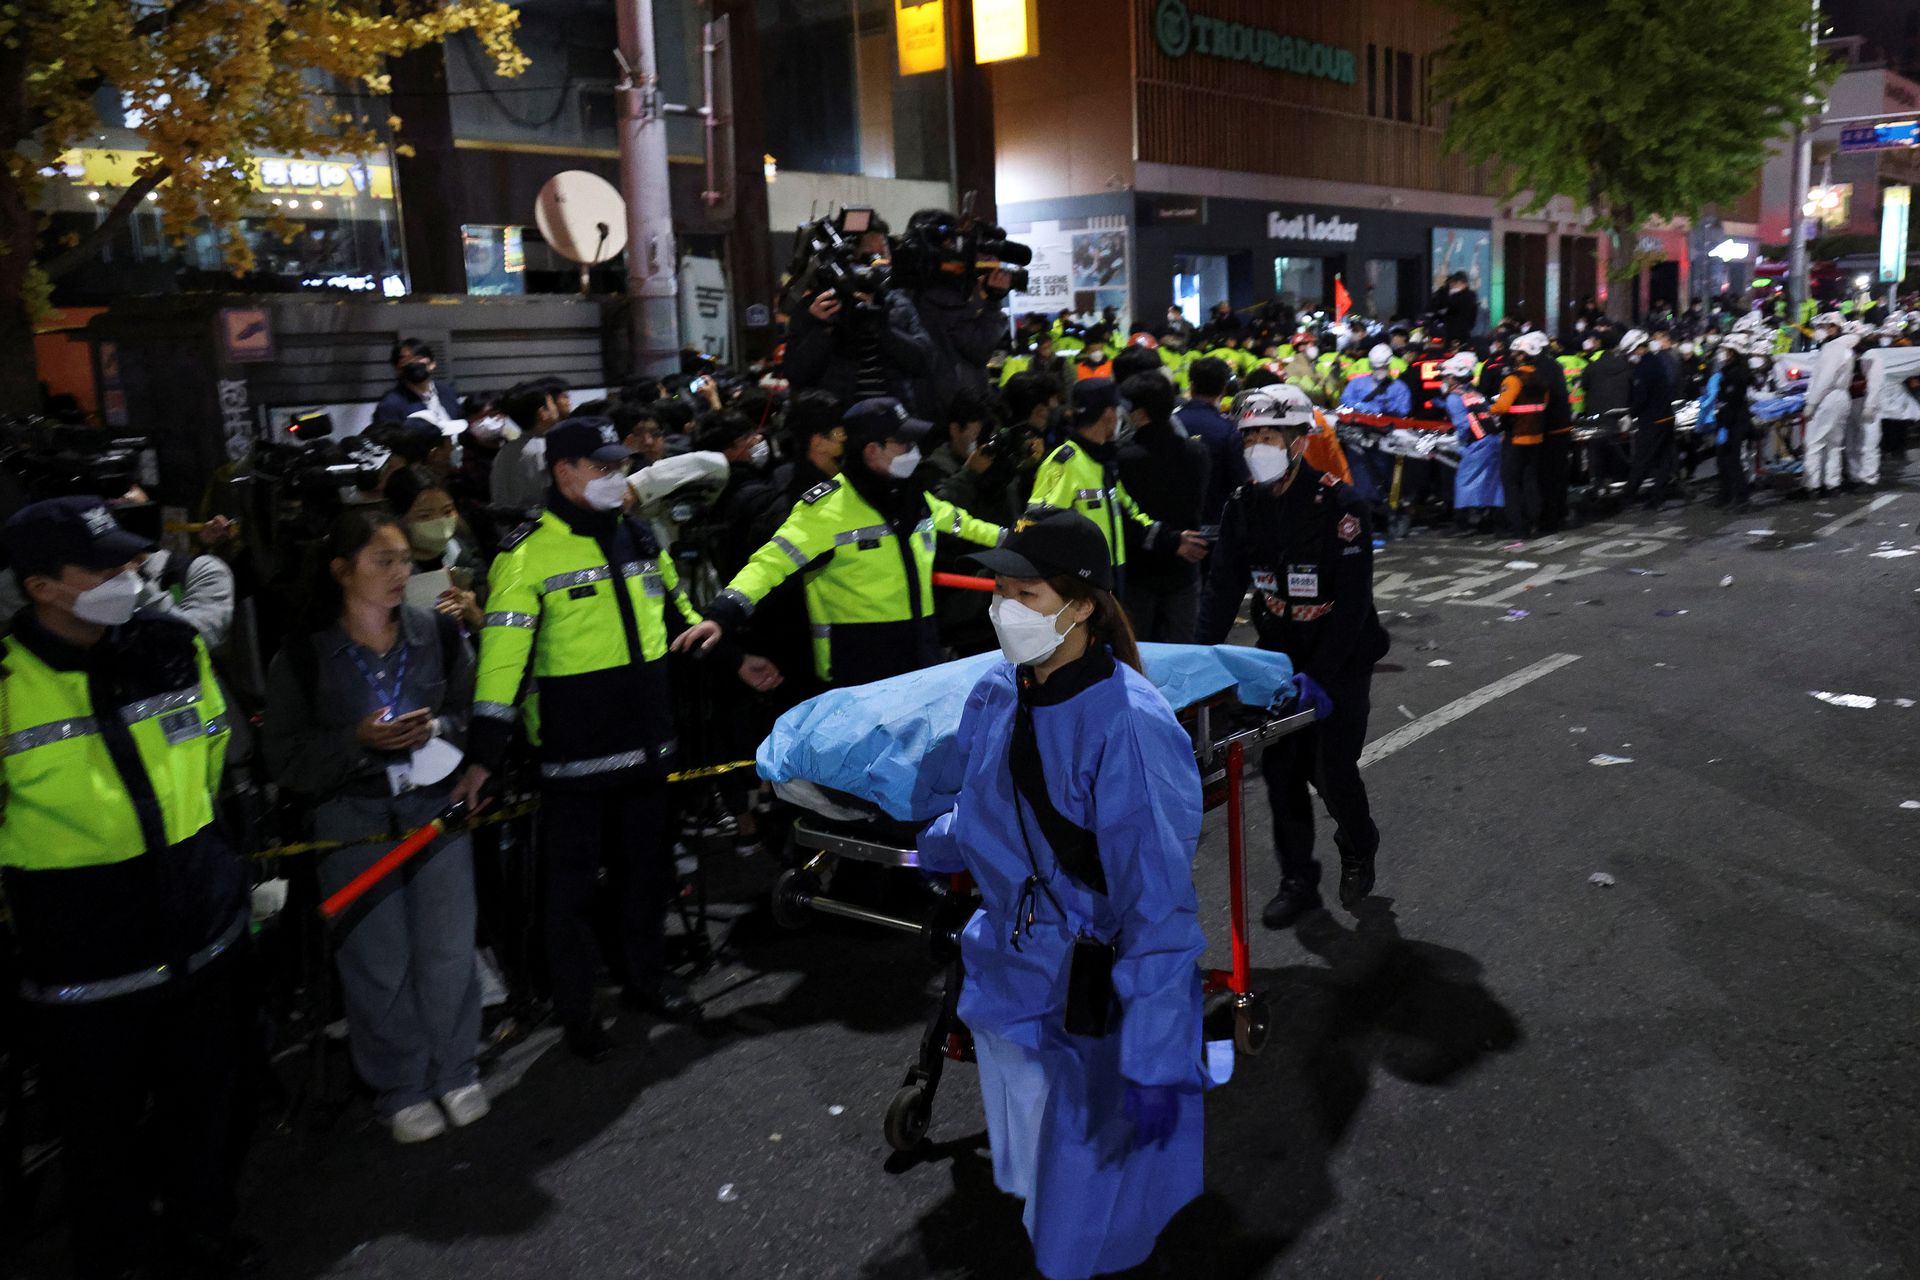 Rescue team members move a body at the scene where dozens of people were injured in a stampede during a Halloween festival in Seoul, South Korea, October 29, 2022. REUTERS/Kim Hong-ji